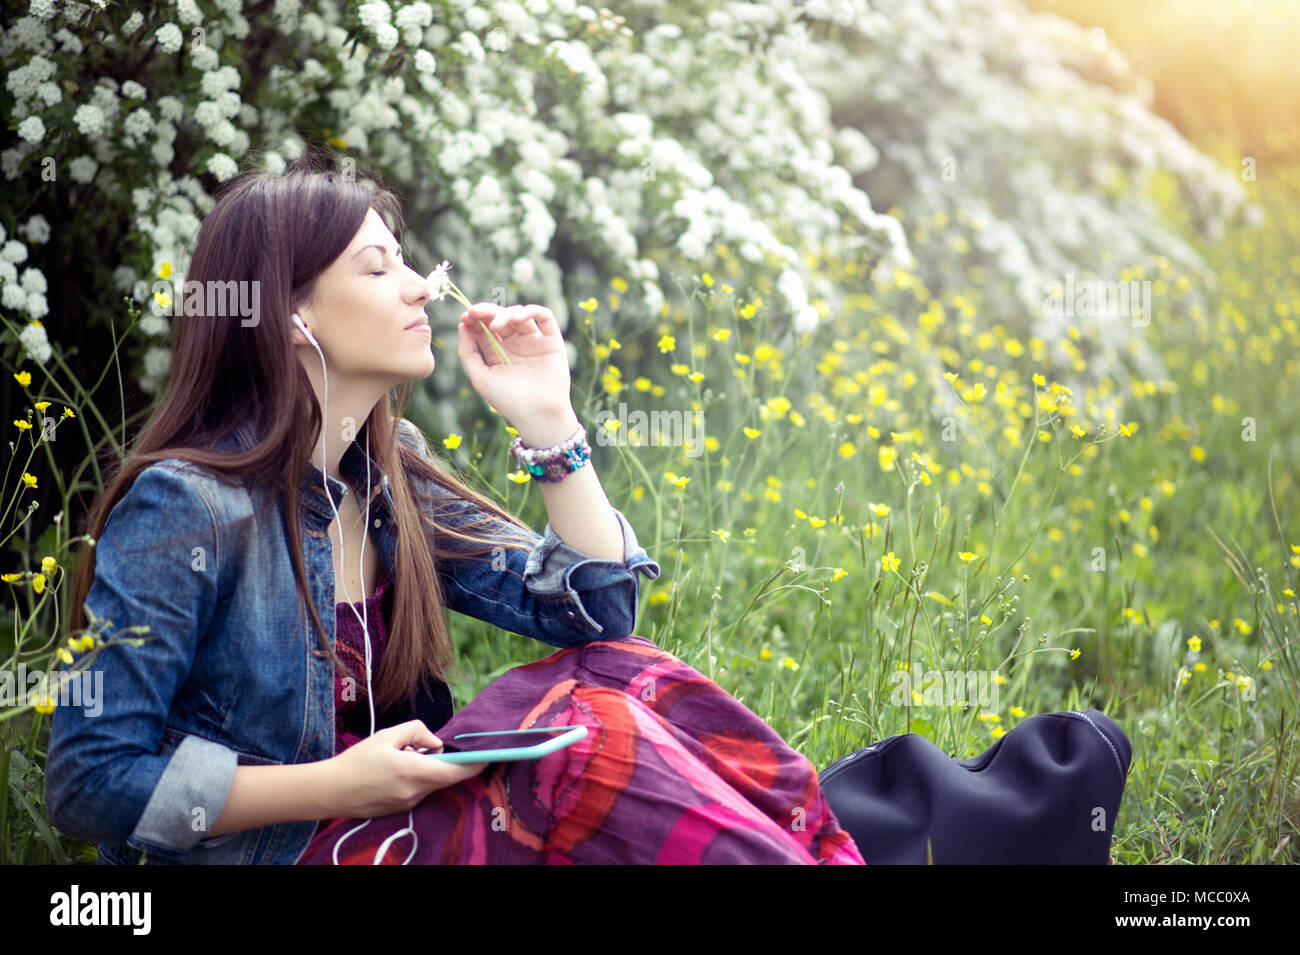 Woman relax with headphones listening to music sitting on grass spring outdoors Stock Photo